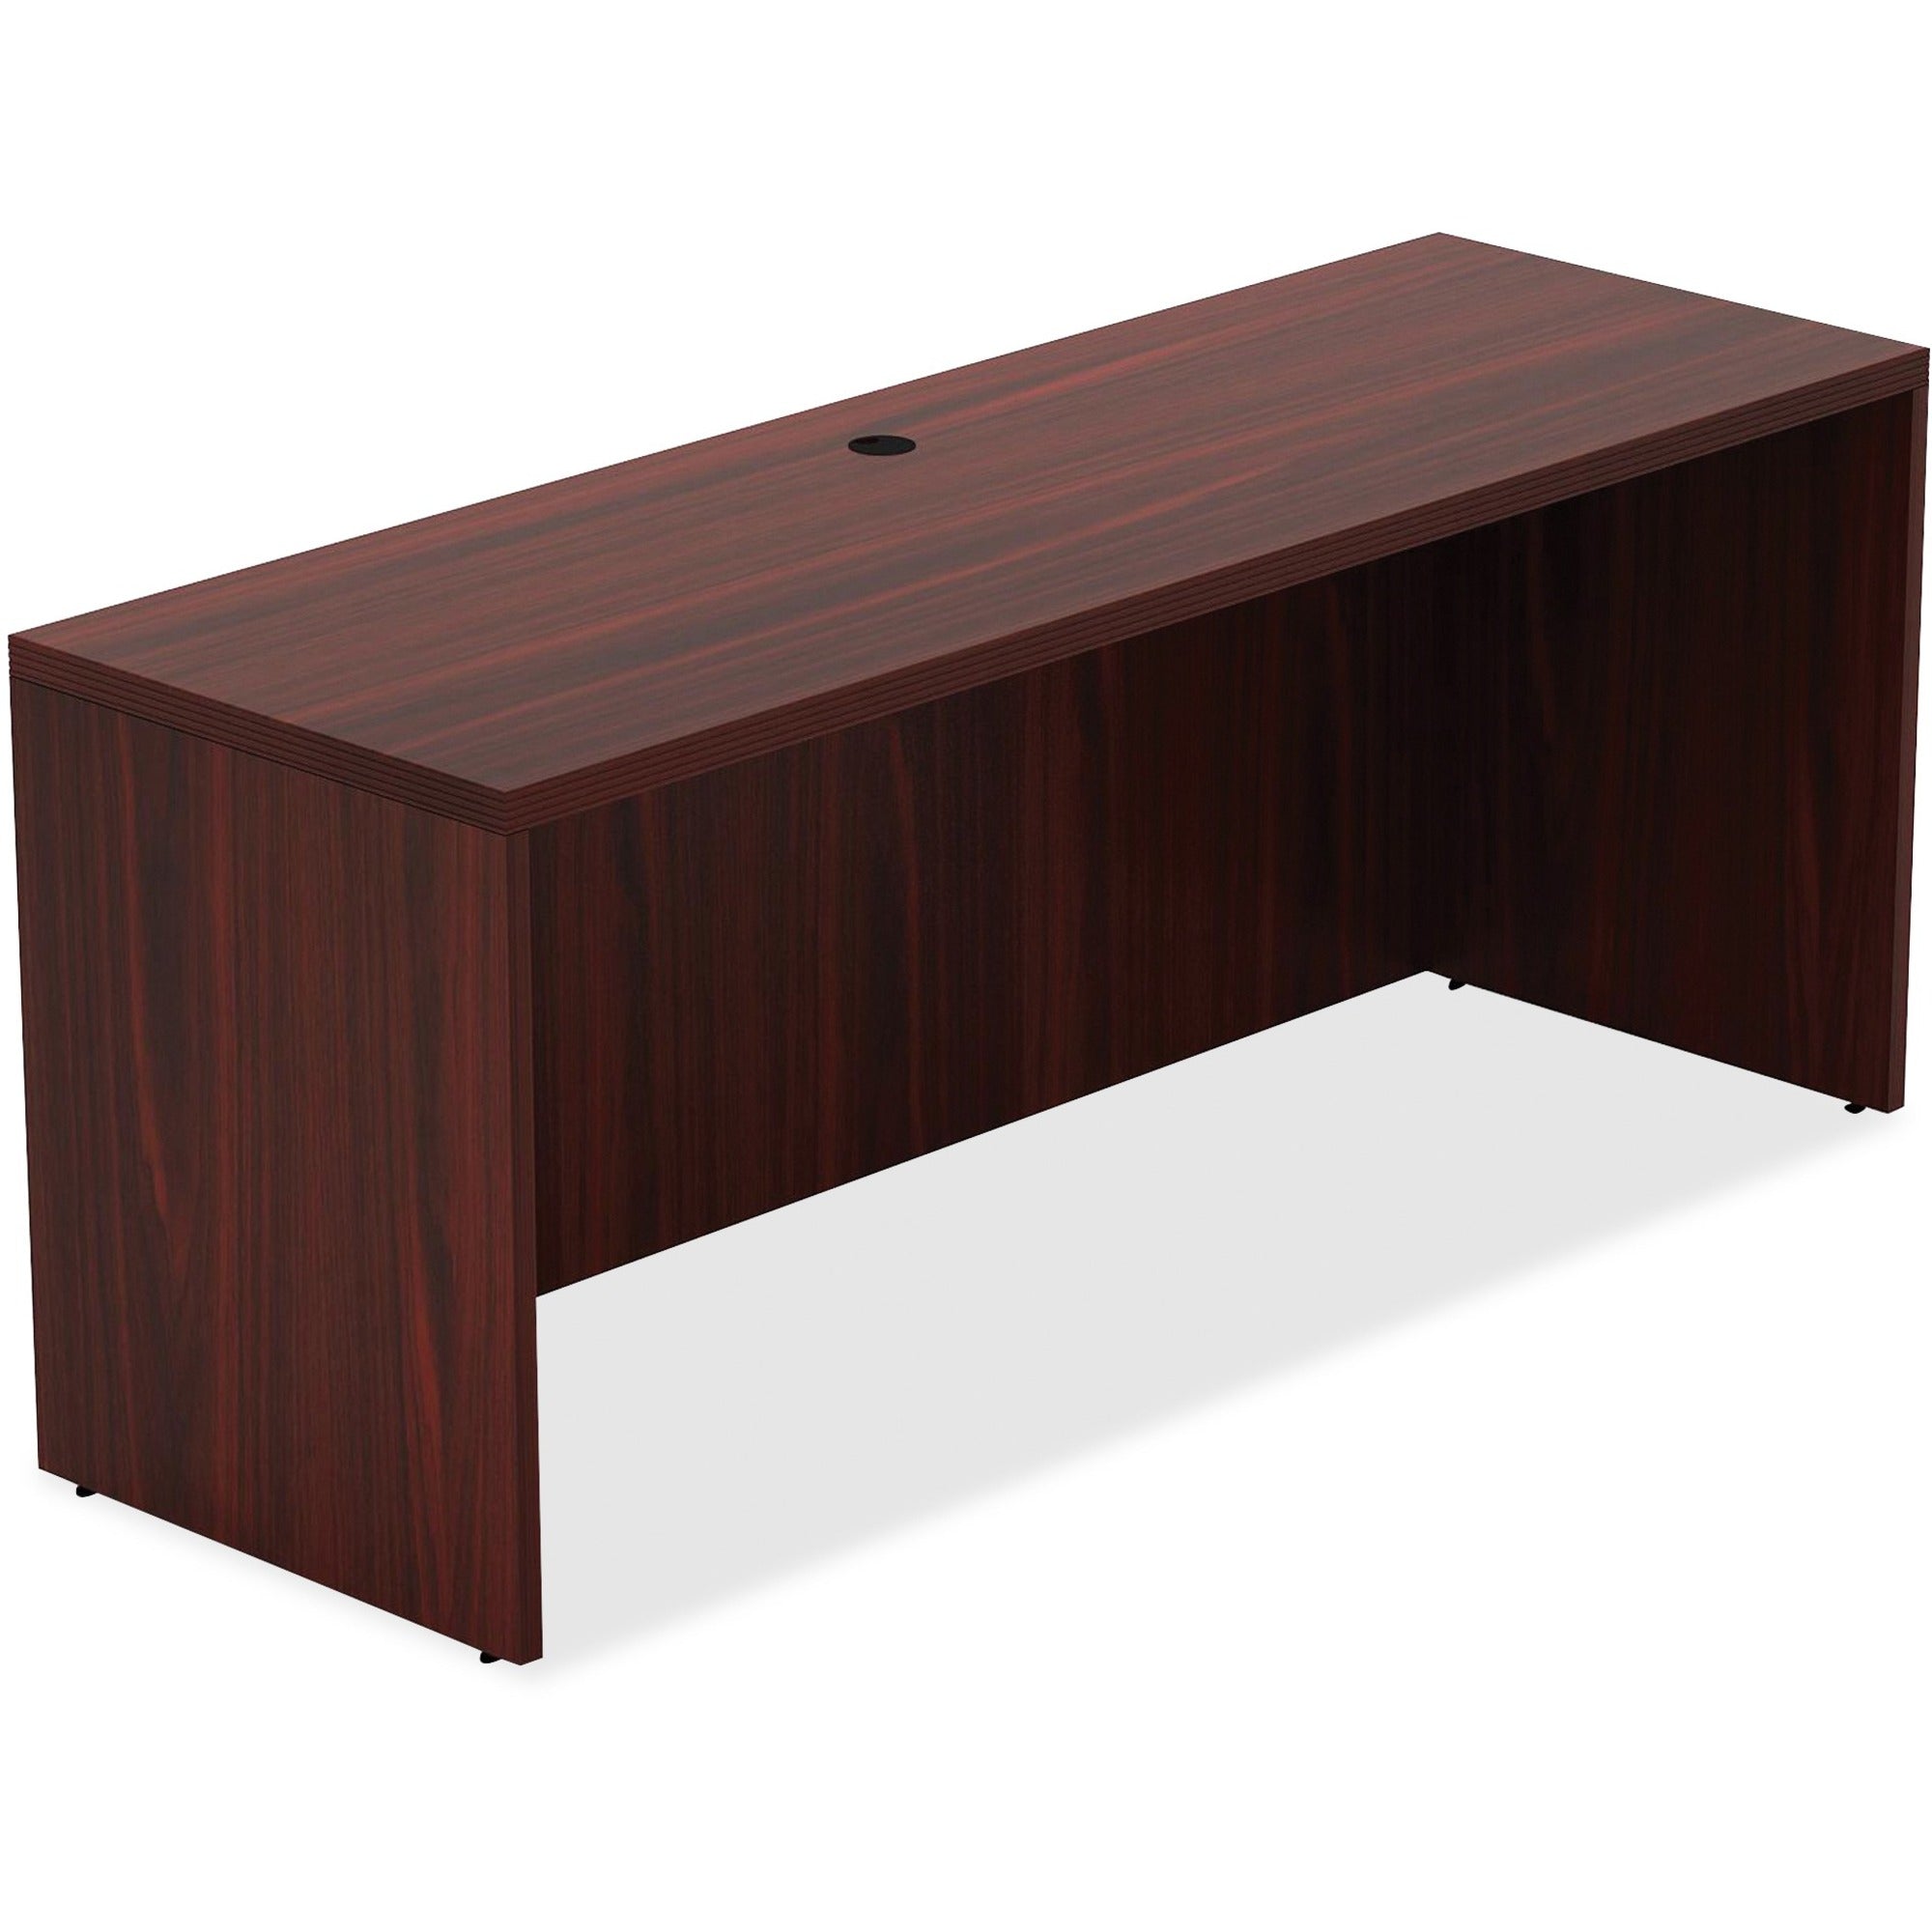 Lorell Chateau Series Credenza - 59" x 23.6"30" Credenza, 1.5" Top - Reeded Edge - Material: P2 Particleboard - Finish: Mahogany, Laminate - Durable, Grommet, Cord Management, Modesty Panel - For Office - 